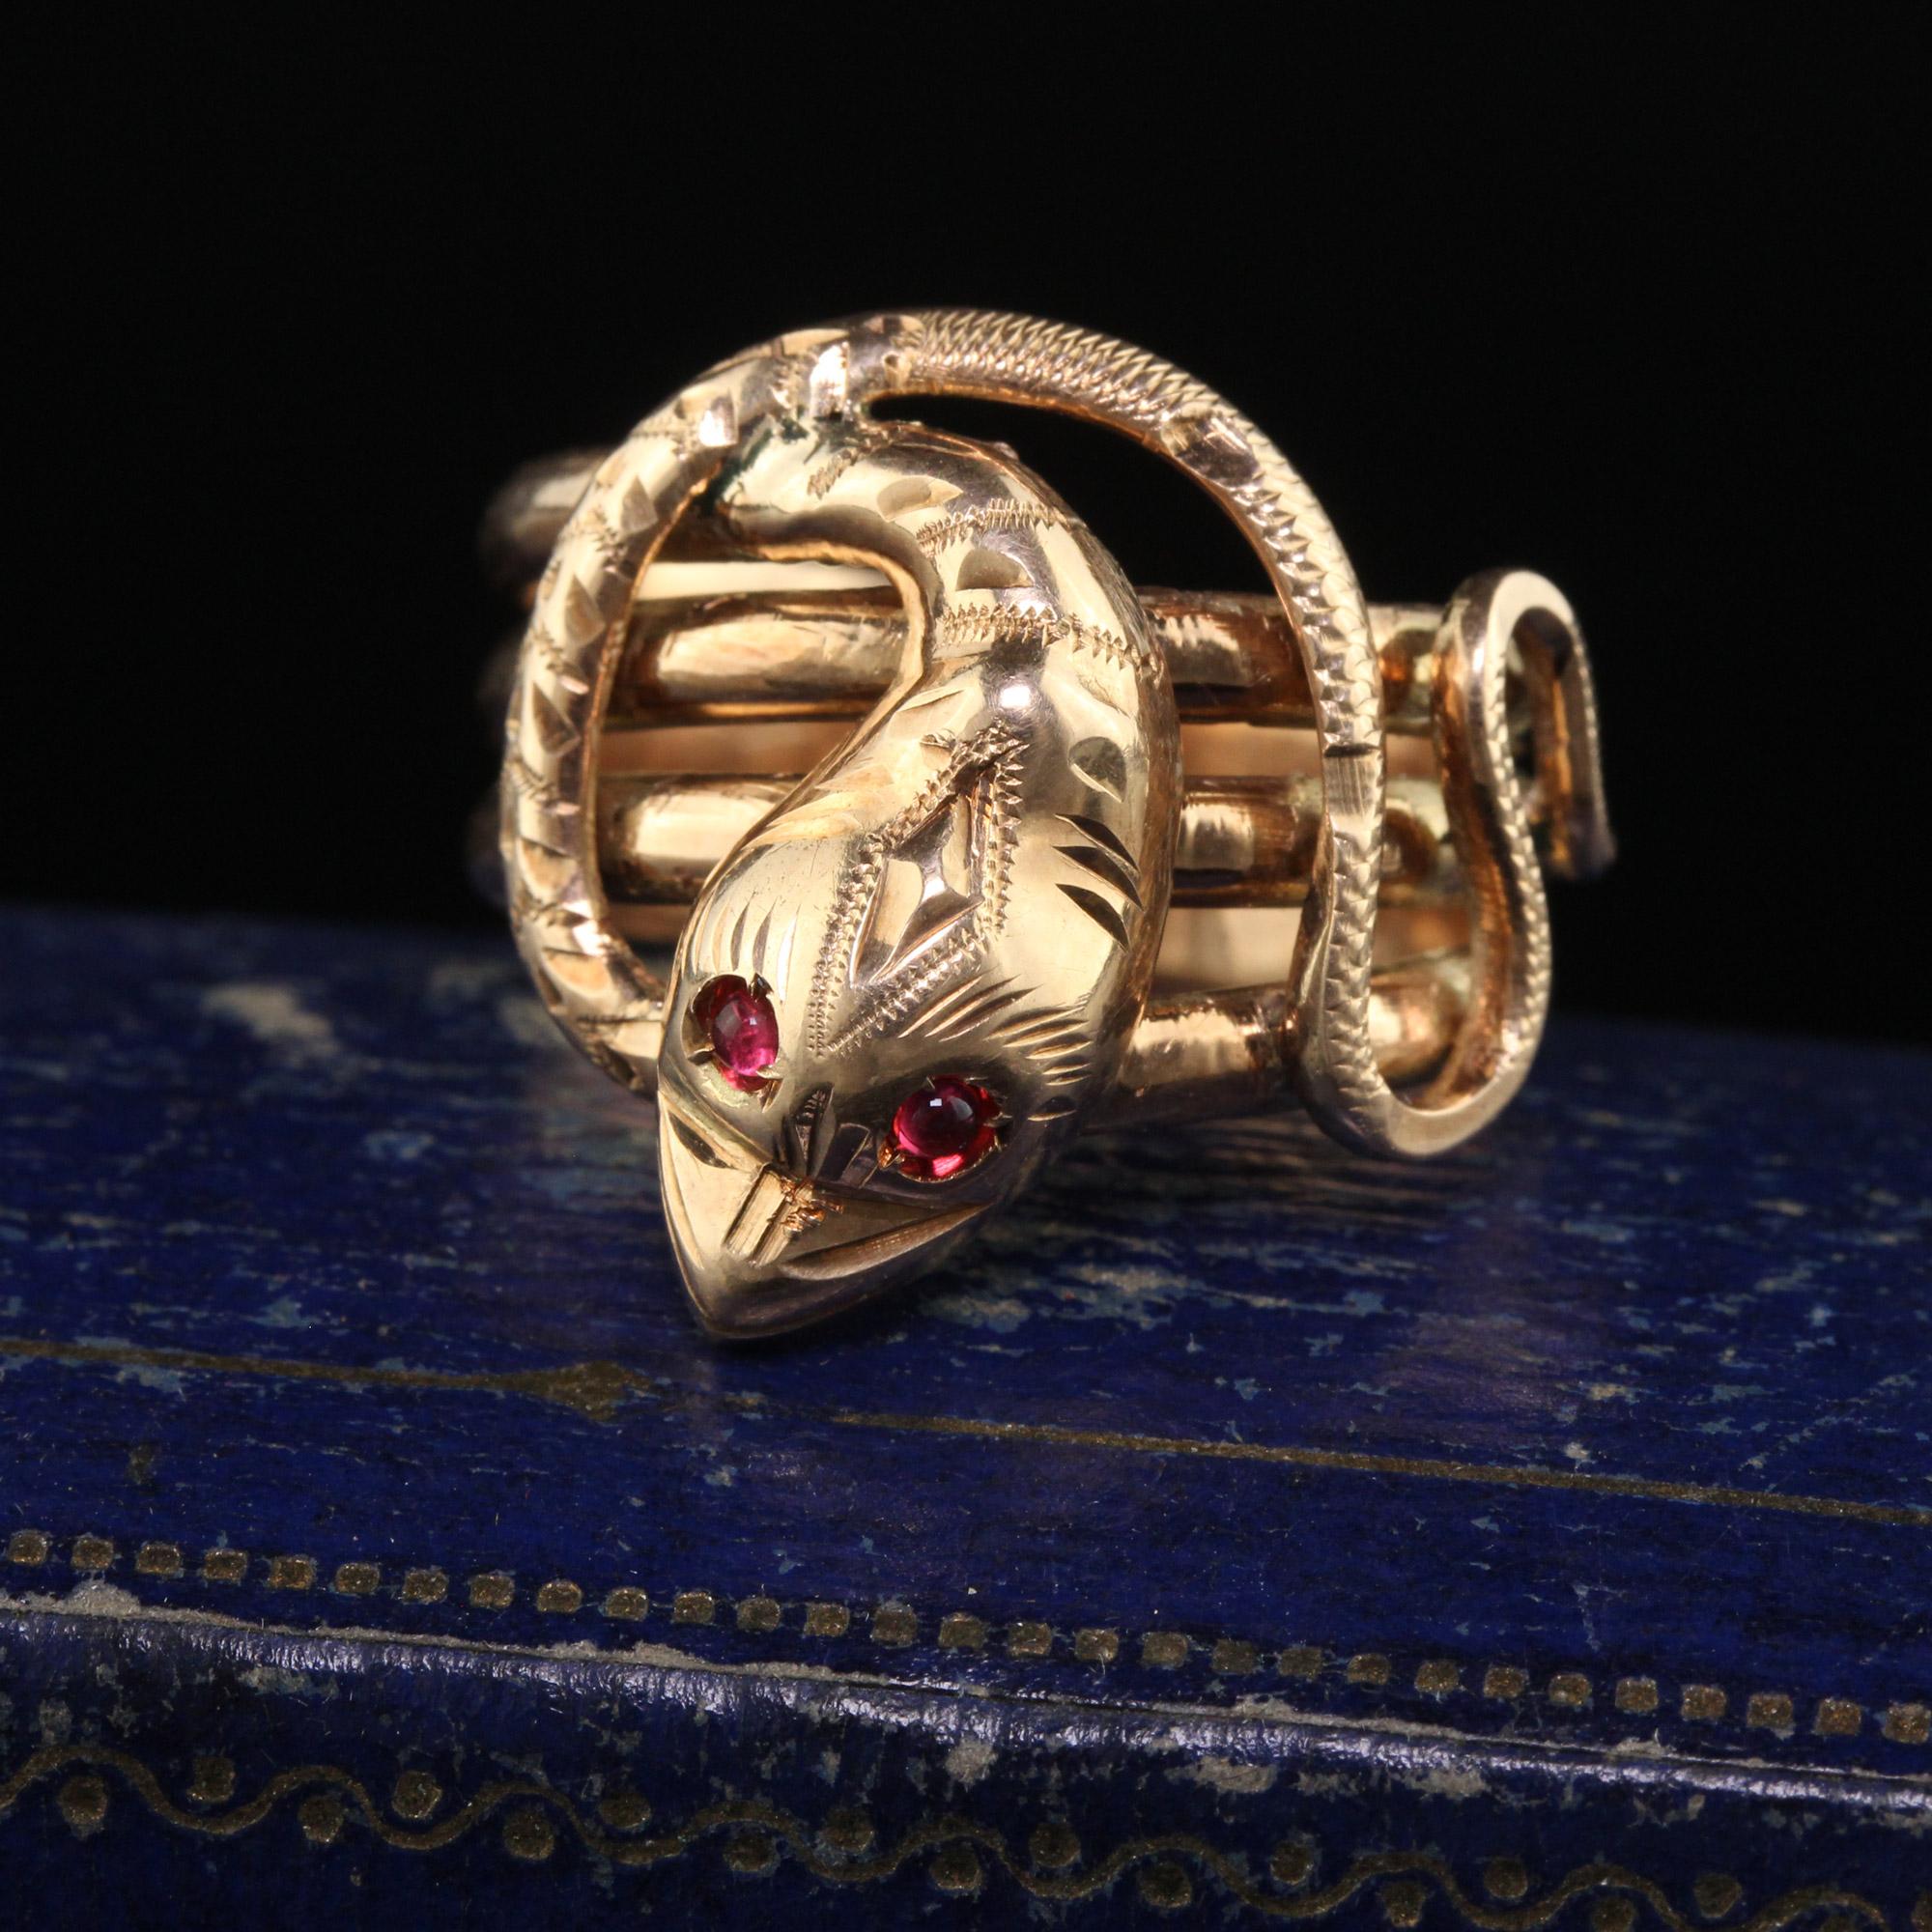 Beautiful Antique Victorian 12K Yellow Gold Wide Snake Ring - Size 8 1/4. This beautiful snake ring is crafted in 12k yellow gold. The ring has a coiled snake and the top is engraved nicely with two ruby eyes. The ring is in good condition and sits